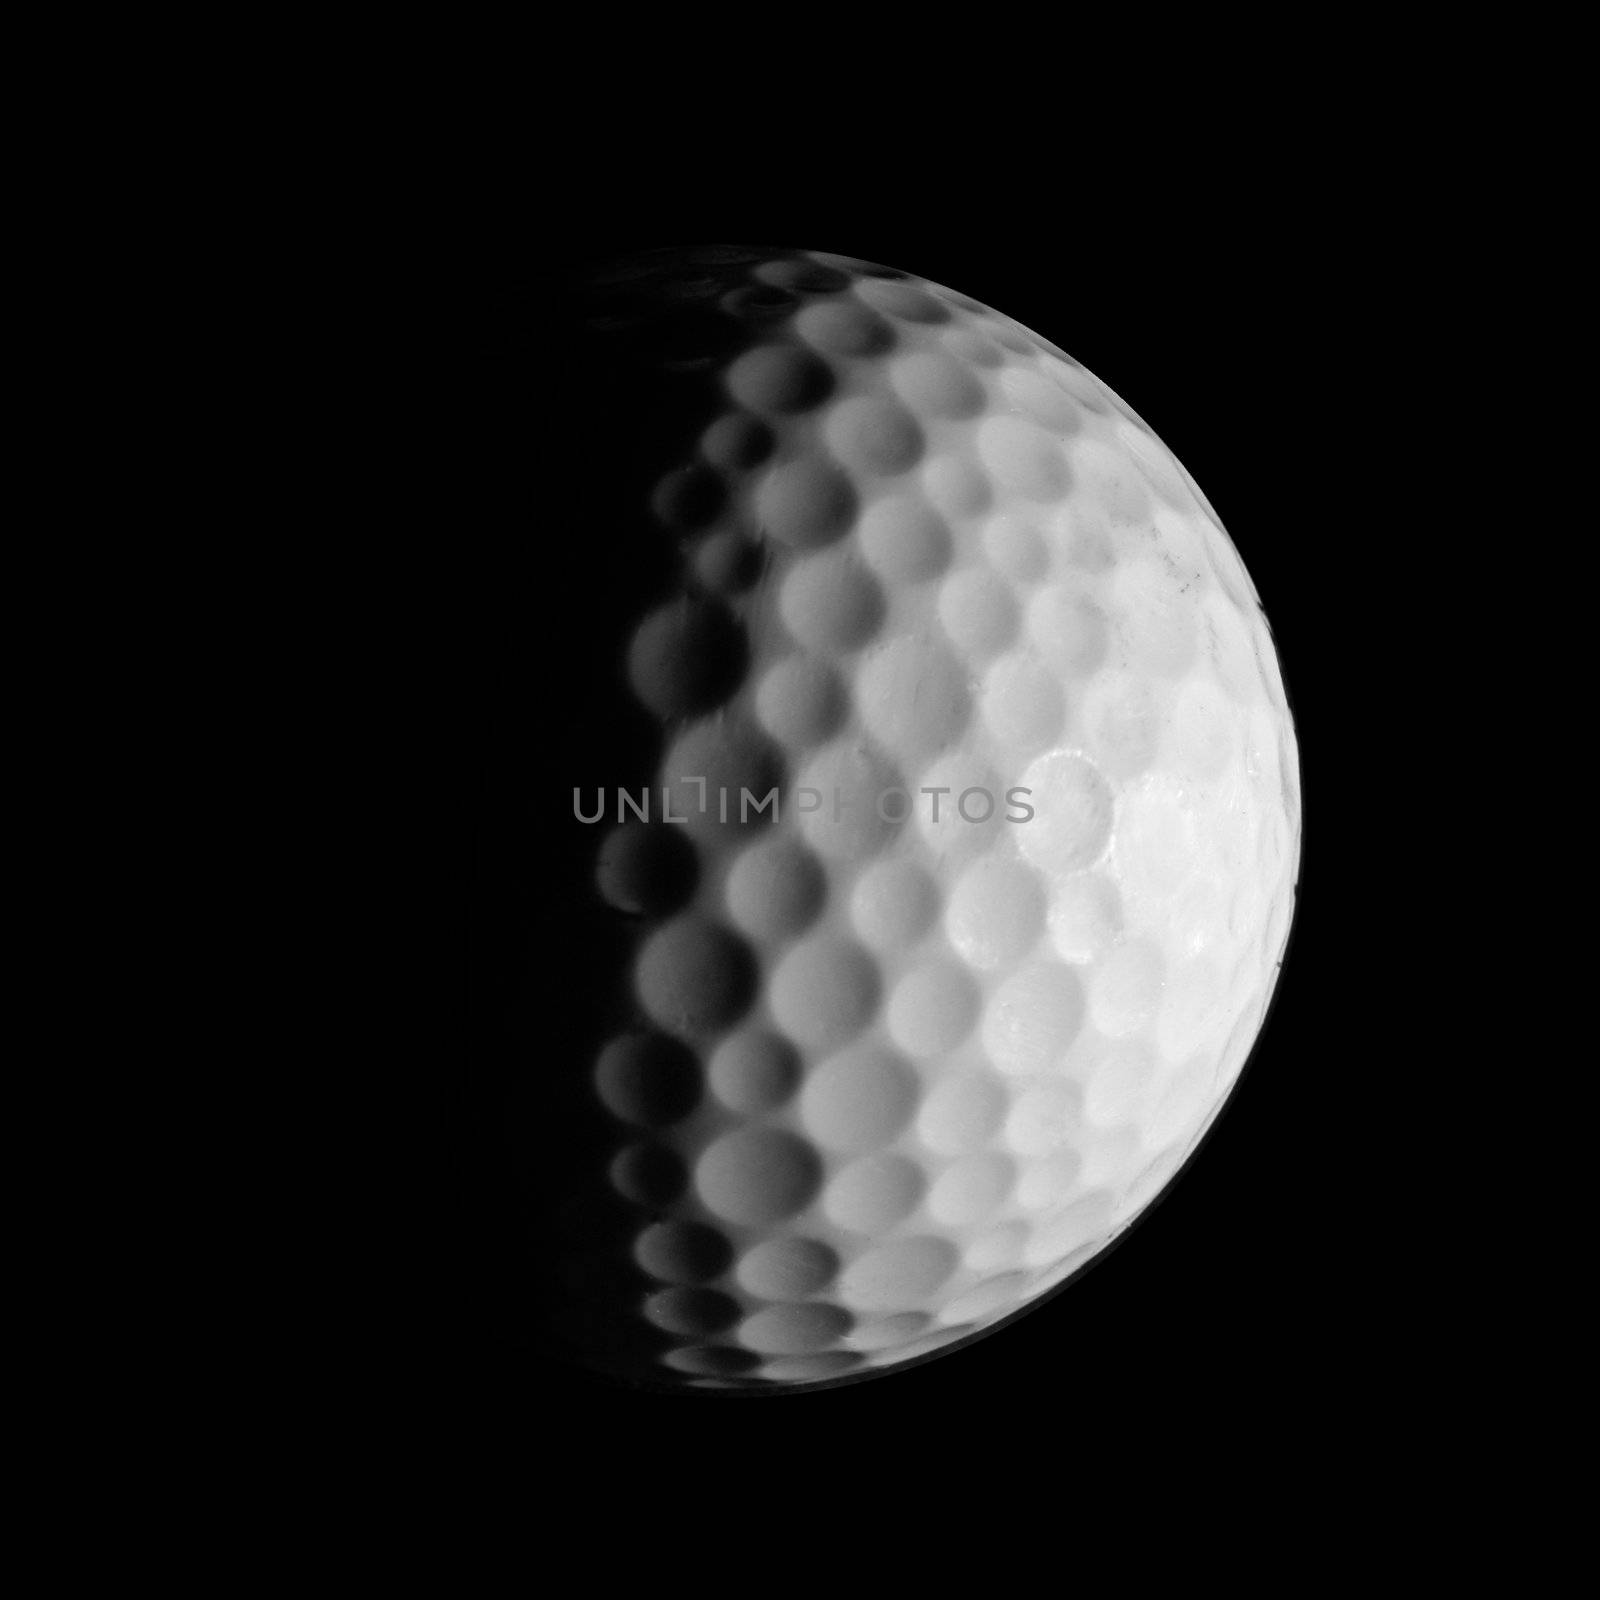 A macro shot of a golf ball highlighting the details of the surface.